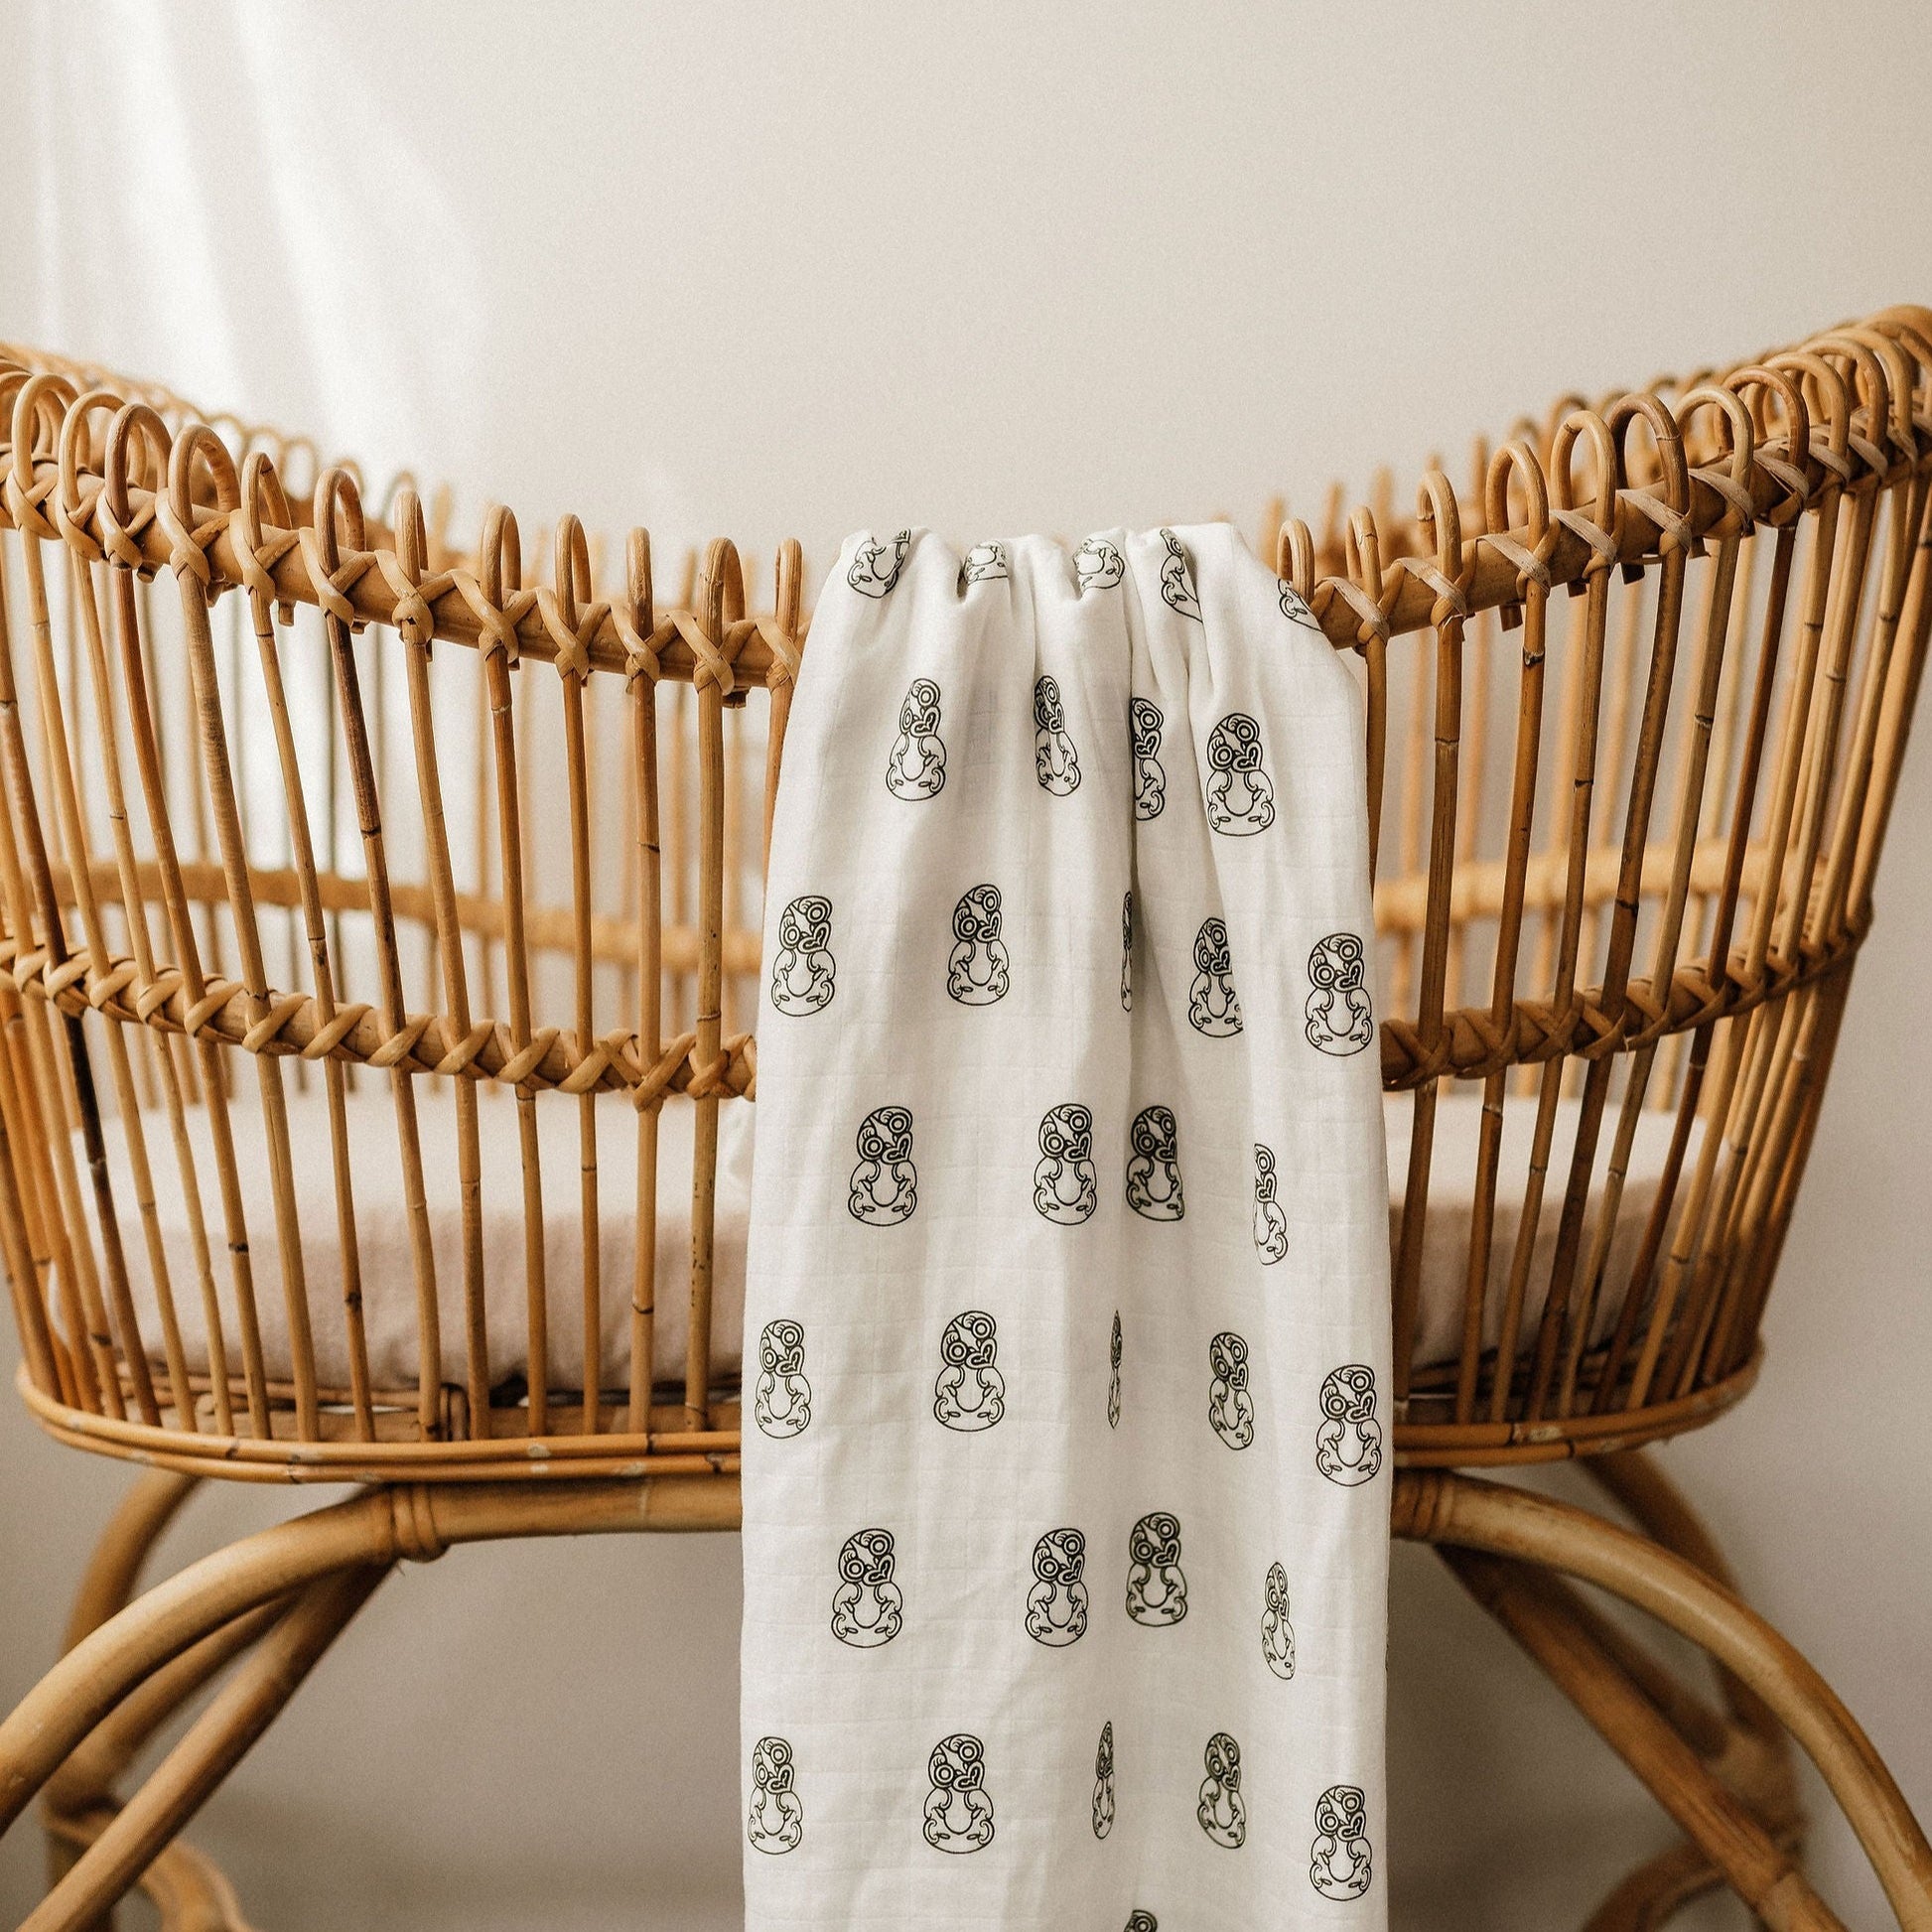 Māori baby, maori, cultural baby, baby wrap, pepe wrap, pēpi wrap, swaddle, feeding cover, nursing cover, shade cloth, baby shade cloth, light baby blanket, bamboo and cotton blend, cultural baby, burp cloth, Māori pēpi wrap, Tiki, Tiki baby